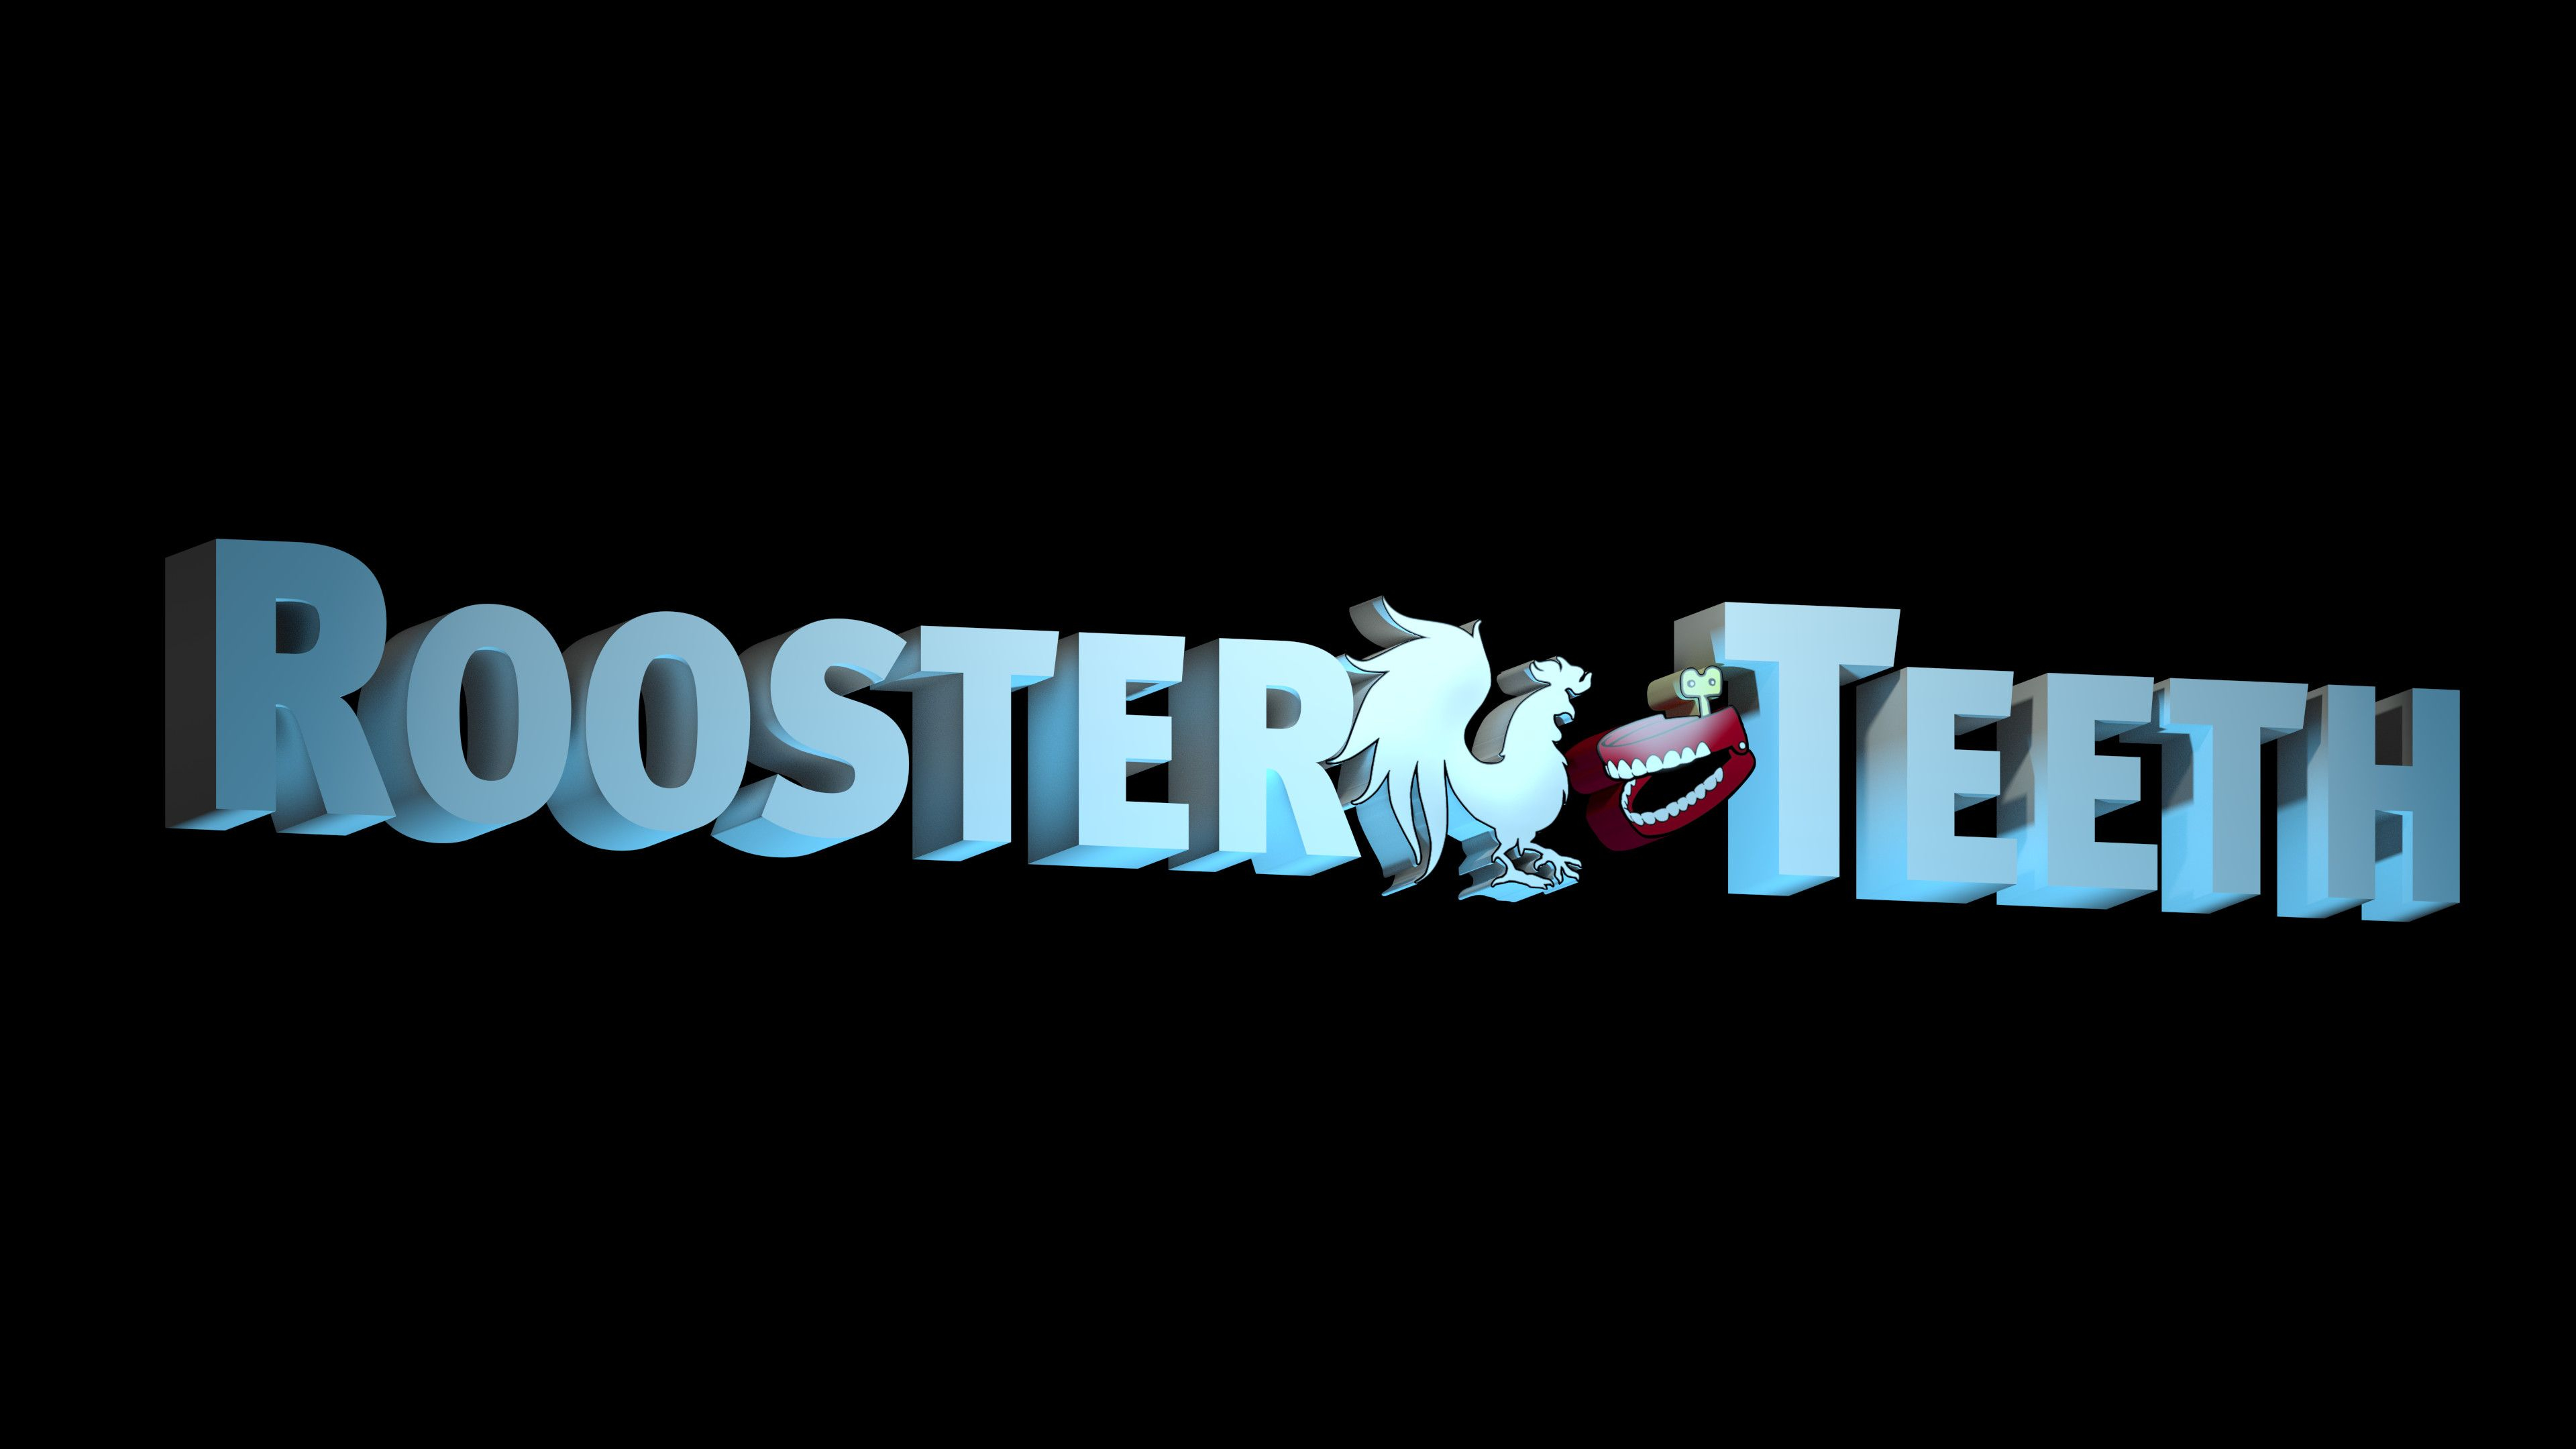 3840x2160 Rooster Teeth Wallpapers Top Free Rooster Teeth Backgrounds